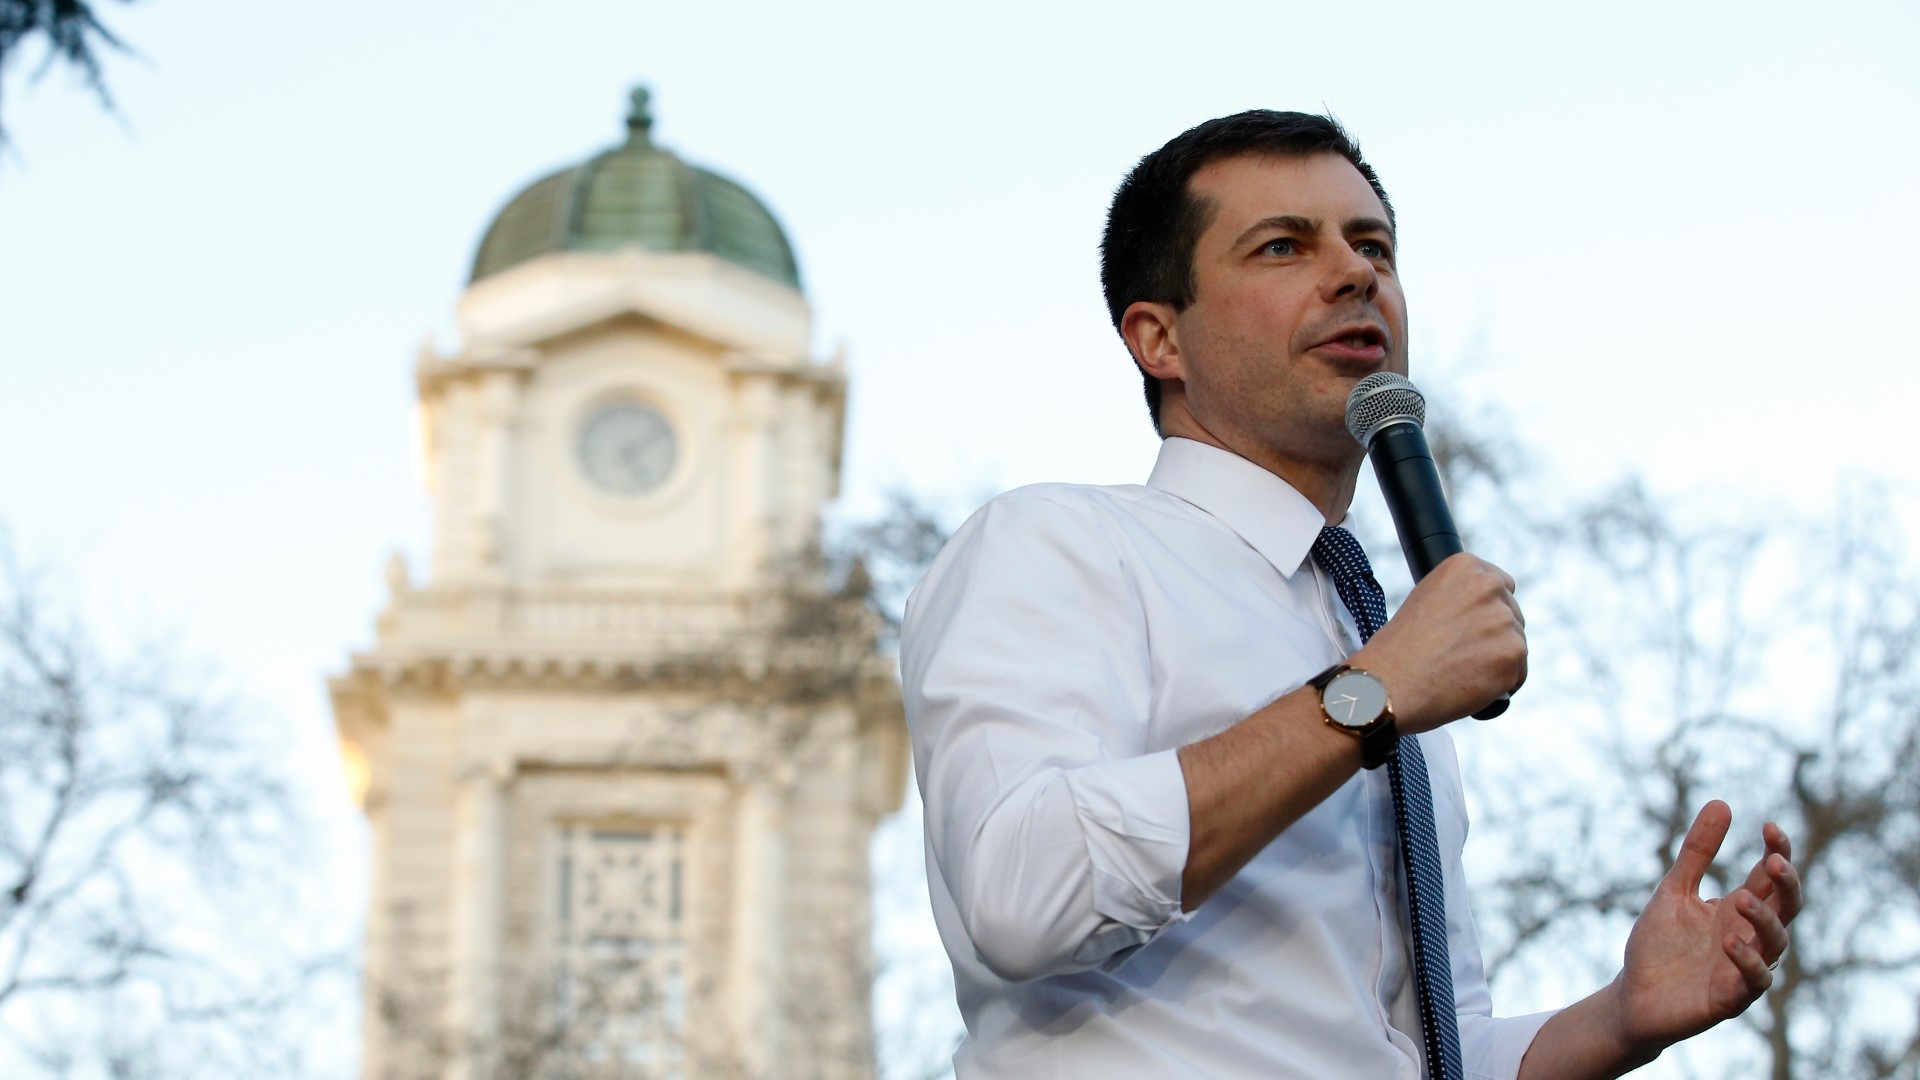 After his event, former South Bend Mayor Pete Buttigieg spoke with ABC10 about one of the top issues for Democrats this November: Beating President Donald Trump.